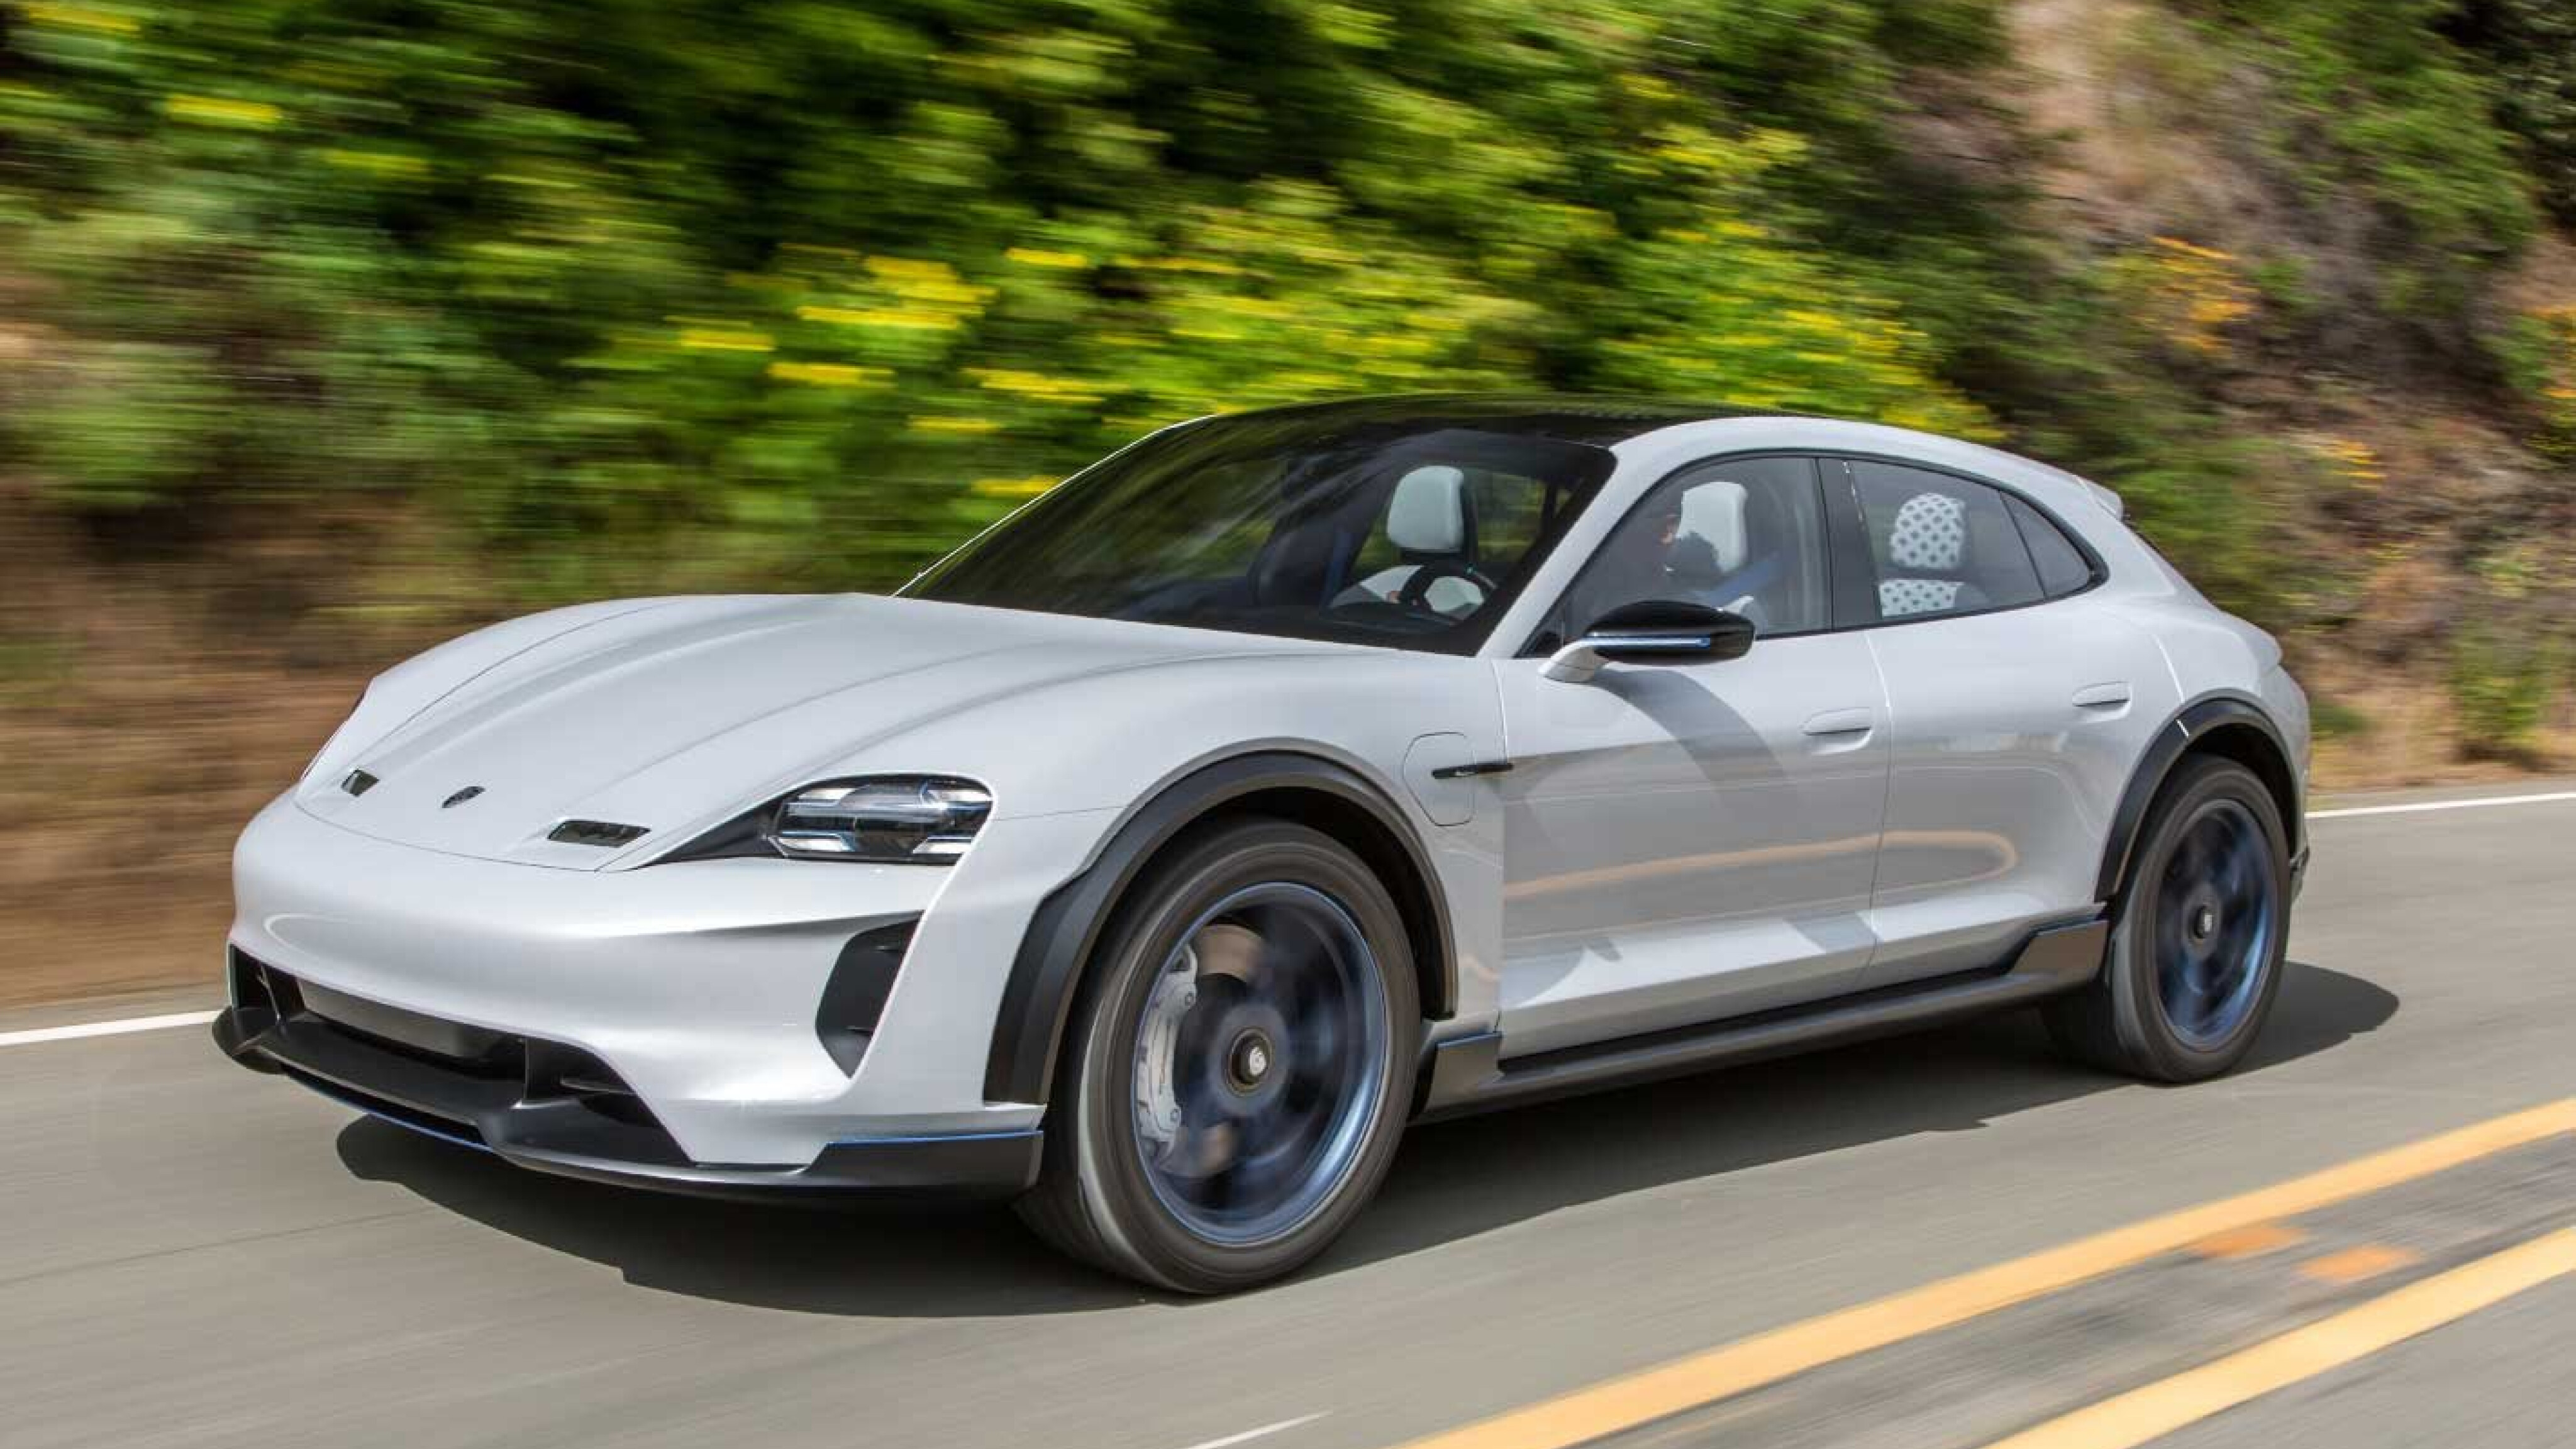 We got behind the wheel of the Porsche Mission X, and it's even